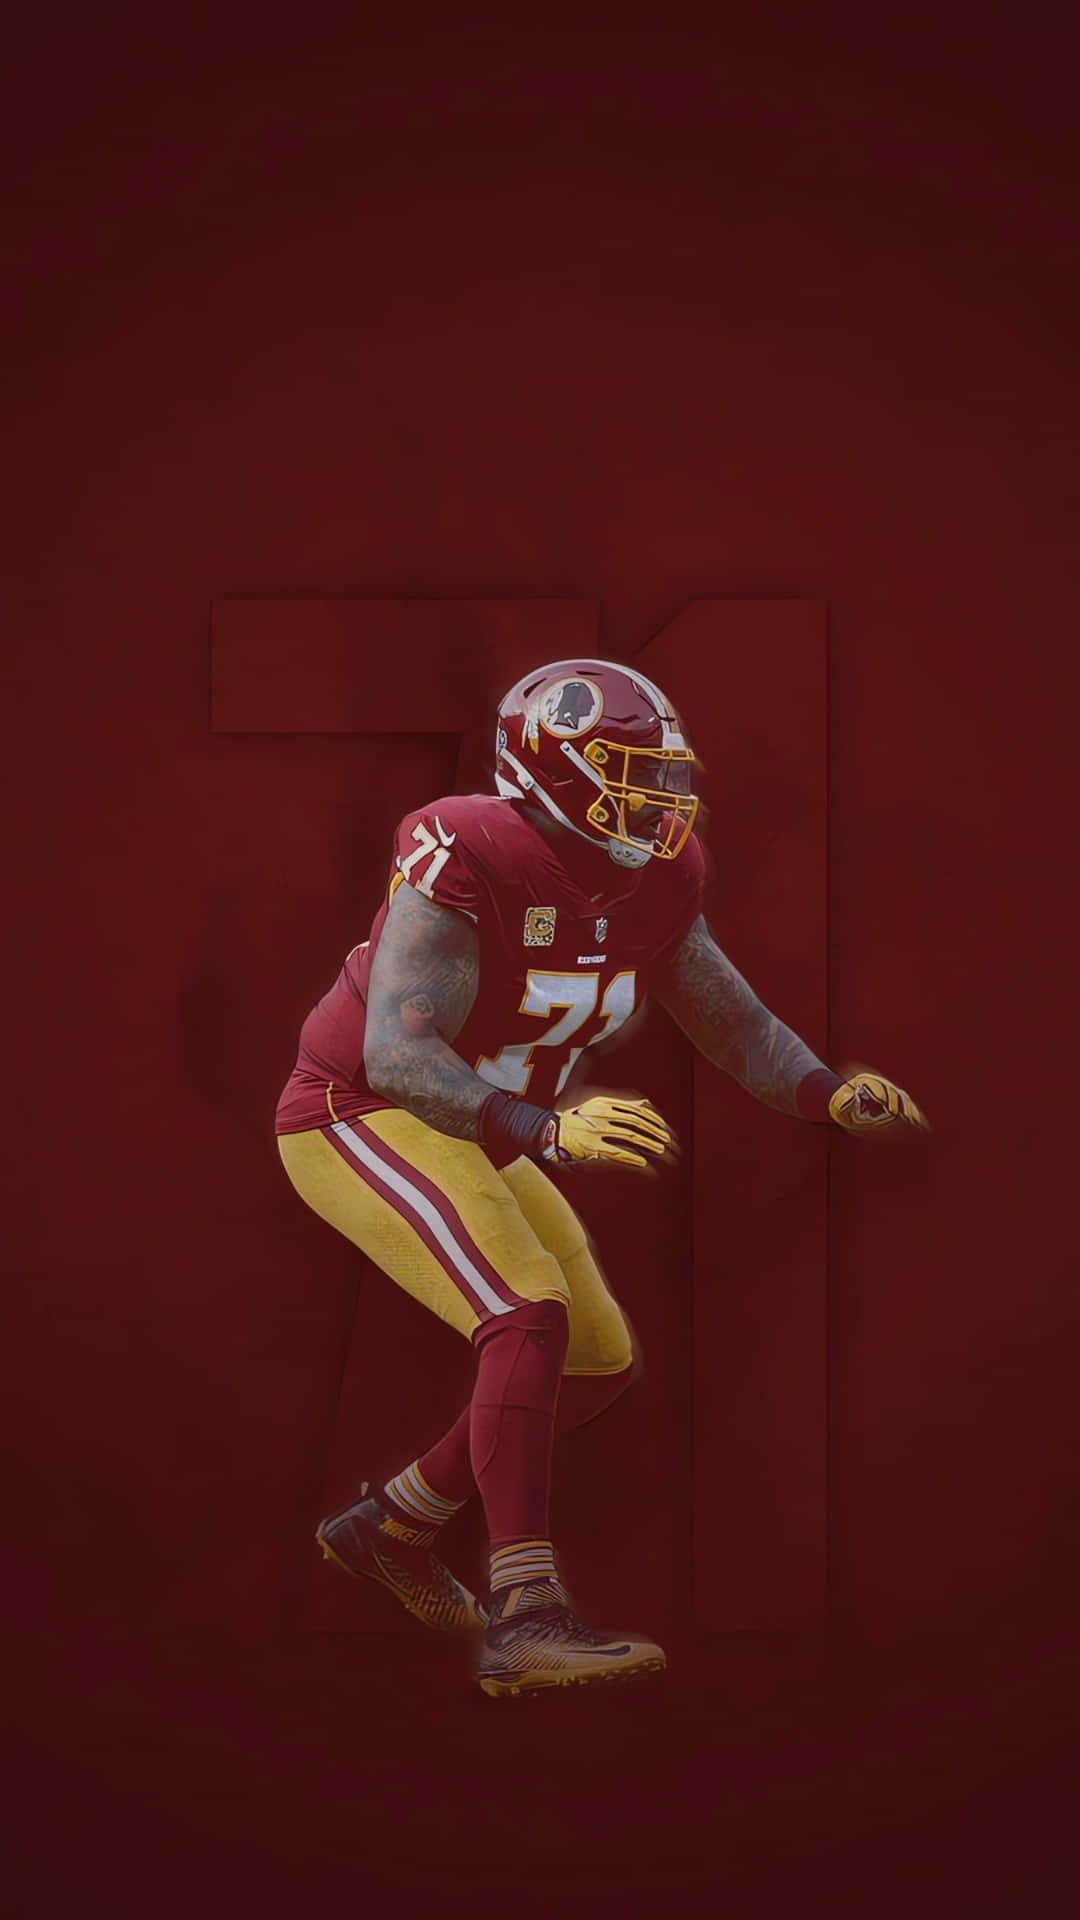 Football Player Action Pose Red Background Wallpaper